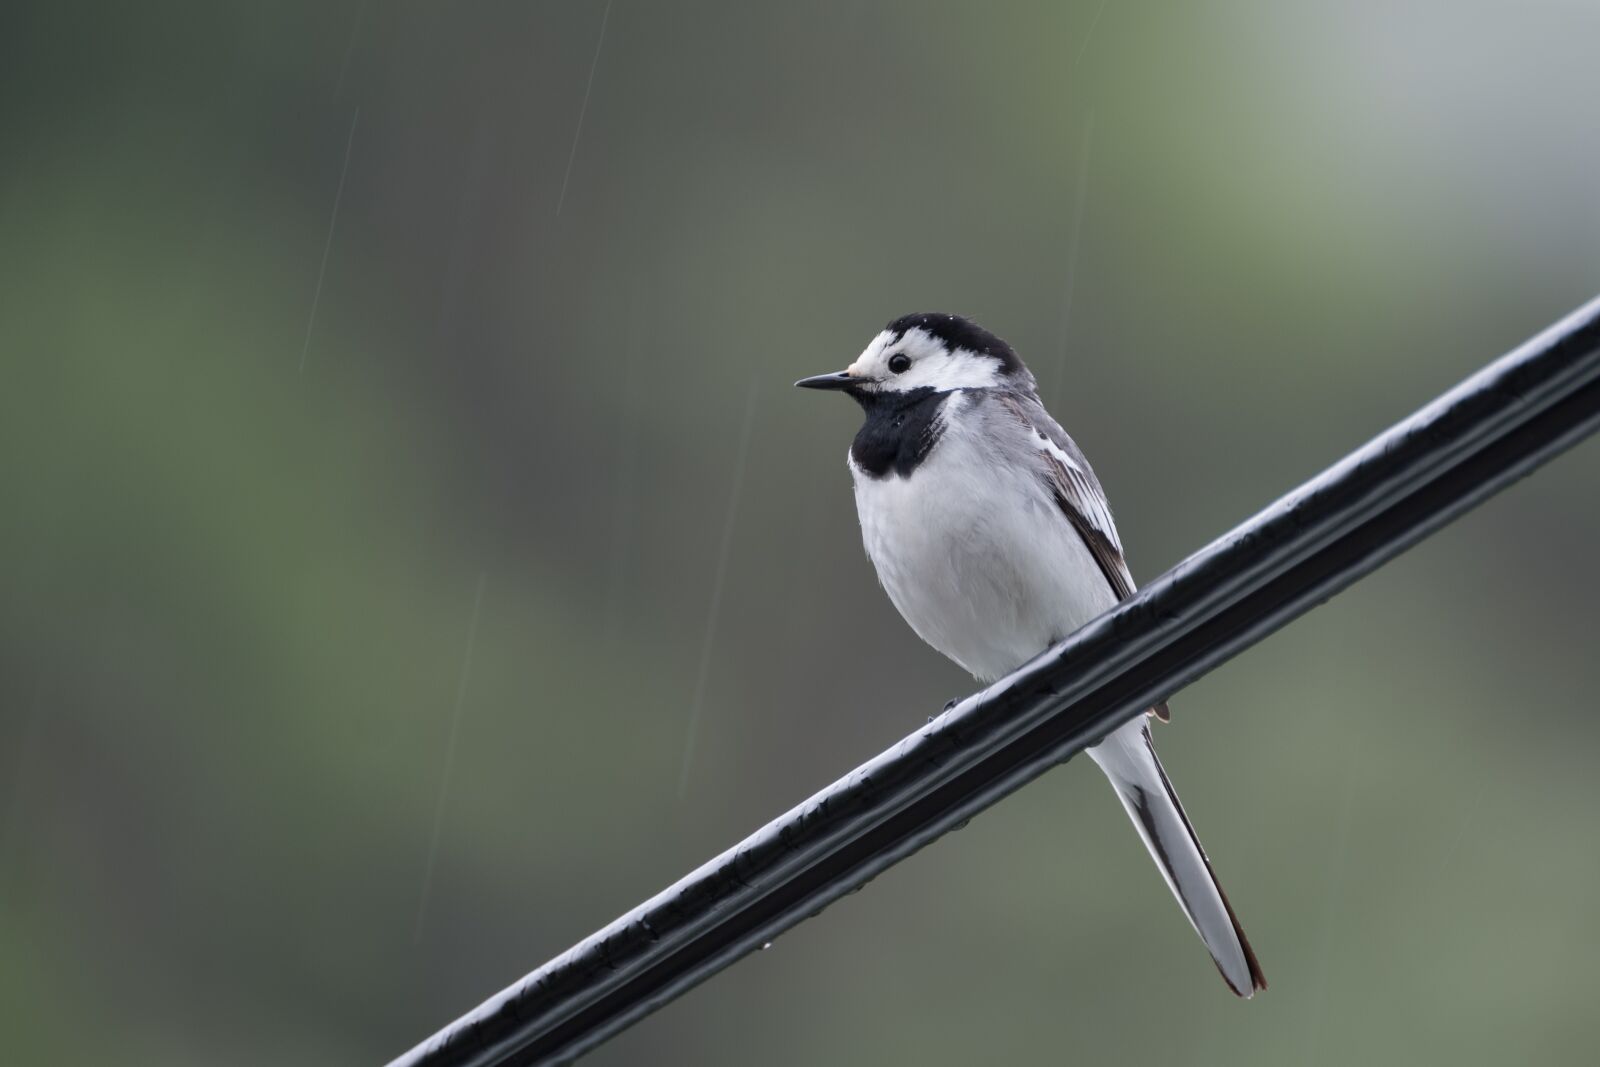 XF100-400mmF4.5-5.6 R LM OIS WR + 1.4x sample photo. White wagtail, rain, cable photography